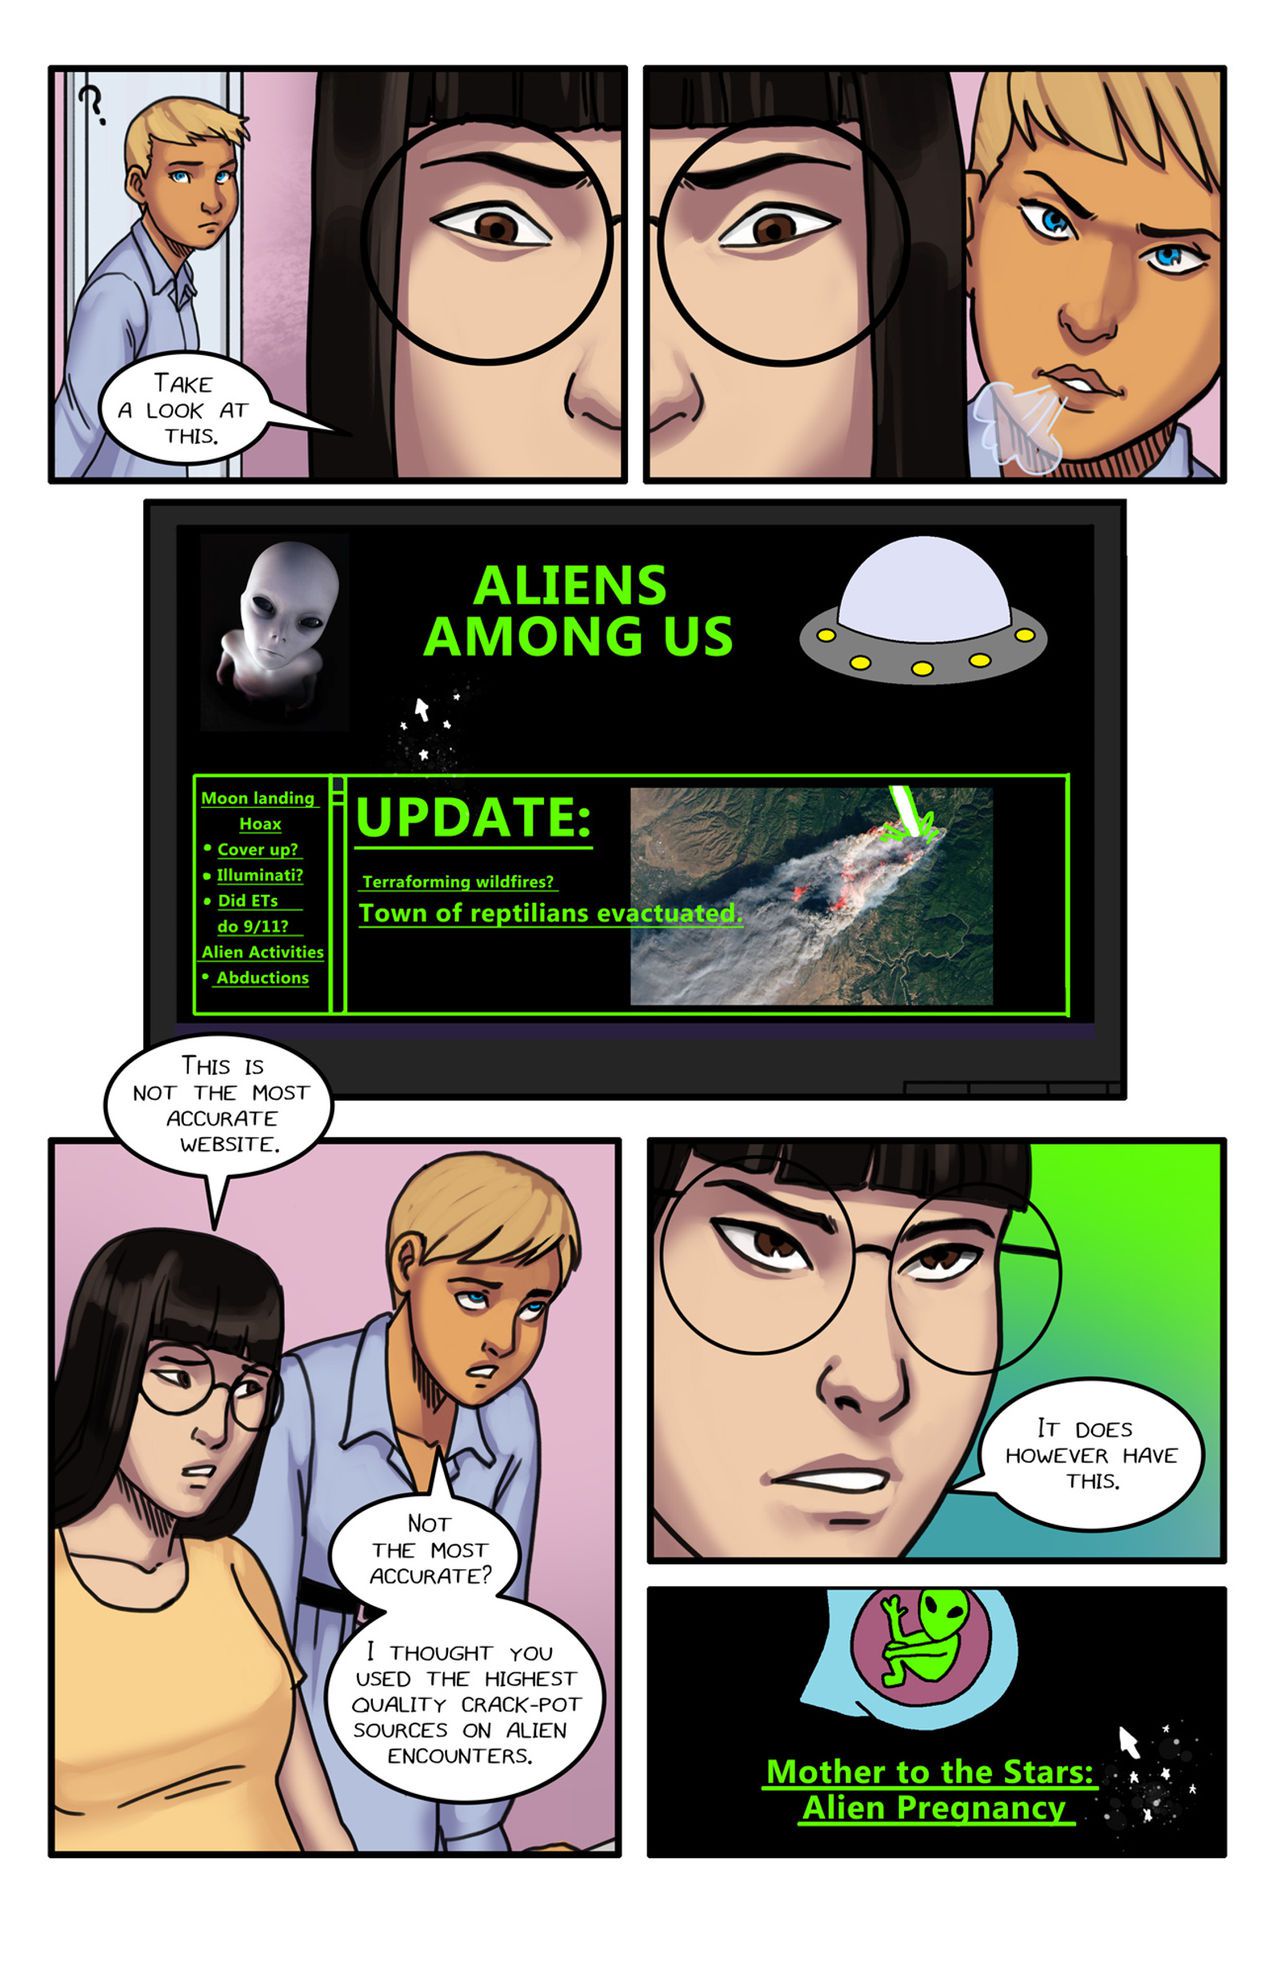 [Olympic-Dames] Alien Pregnancy Expansion Comic Updated (Ongoing) 36